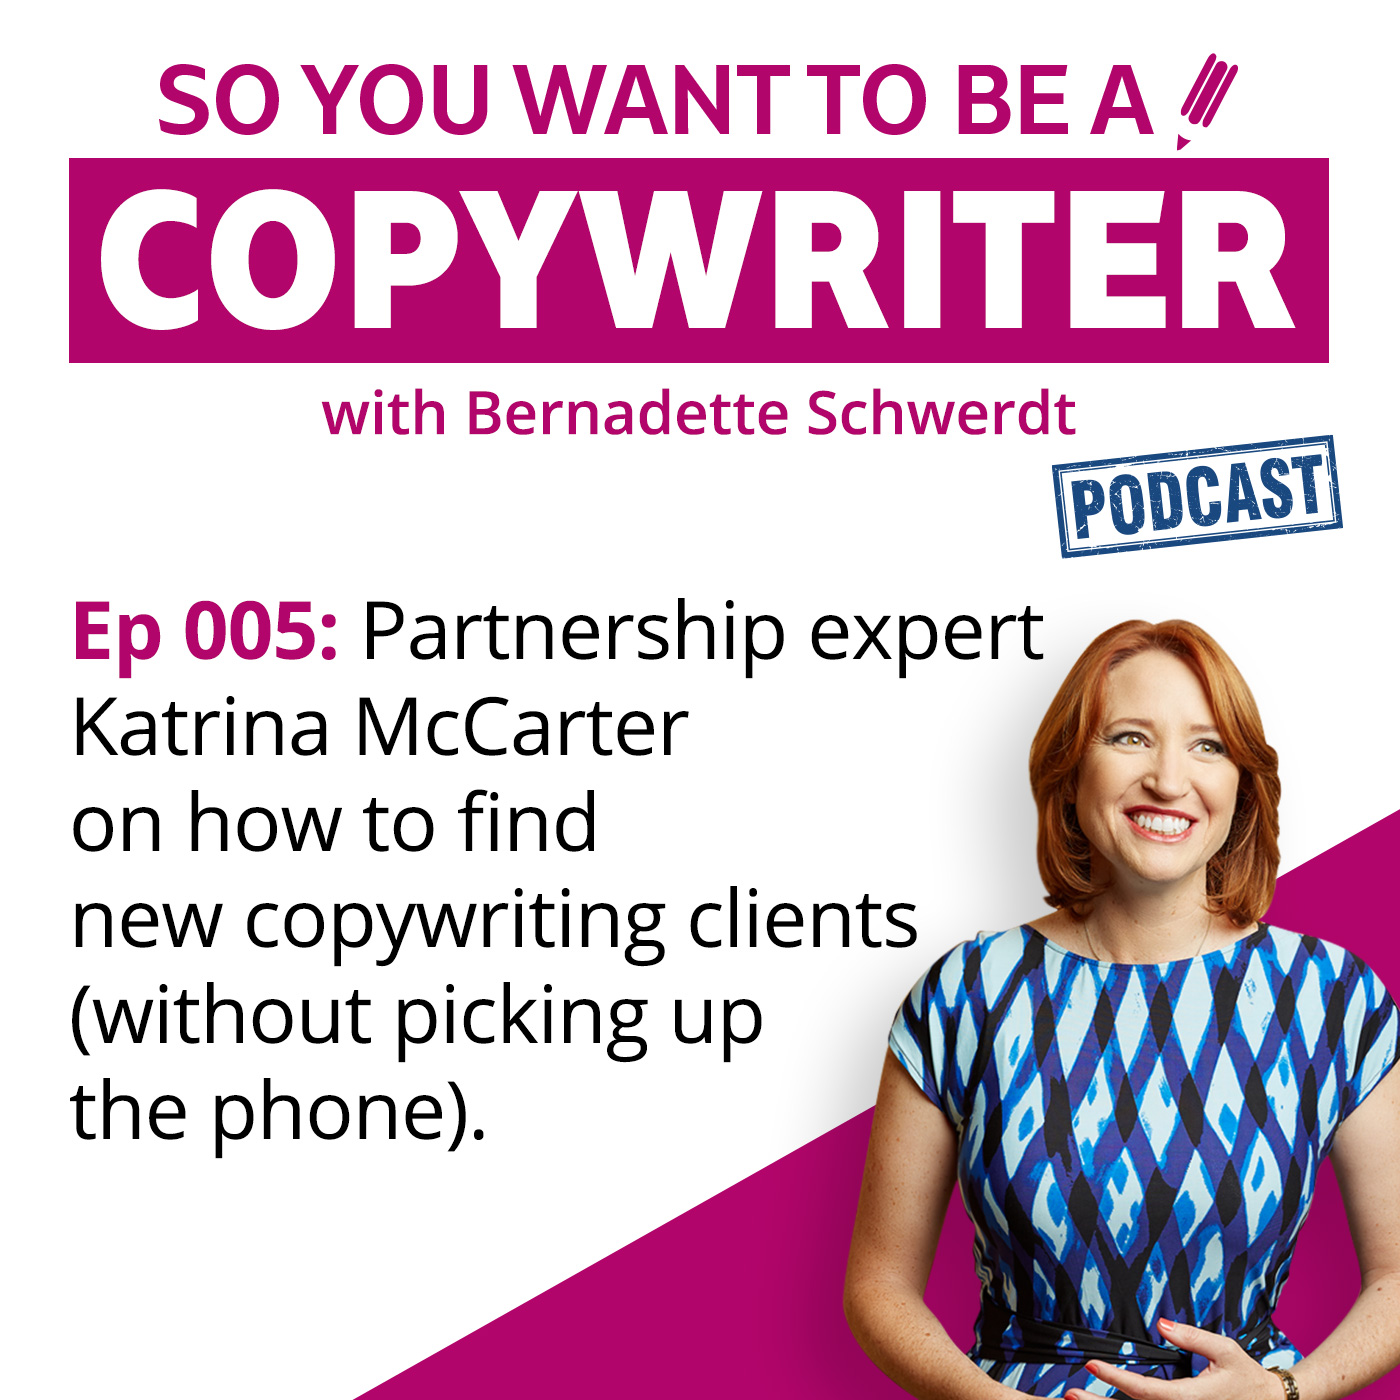 COPYWRITER 005: Partnership expert Katrina McCarter on how to find new copywriting clients (without picking up the phone)